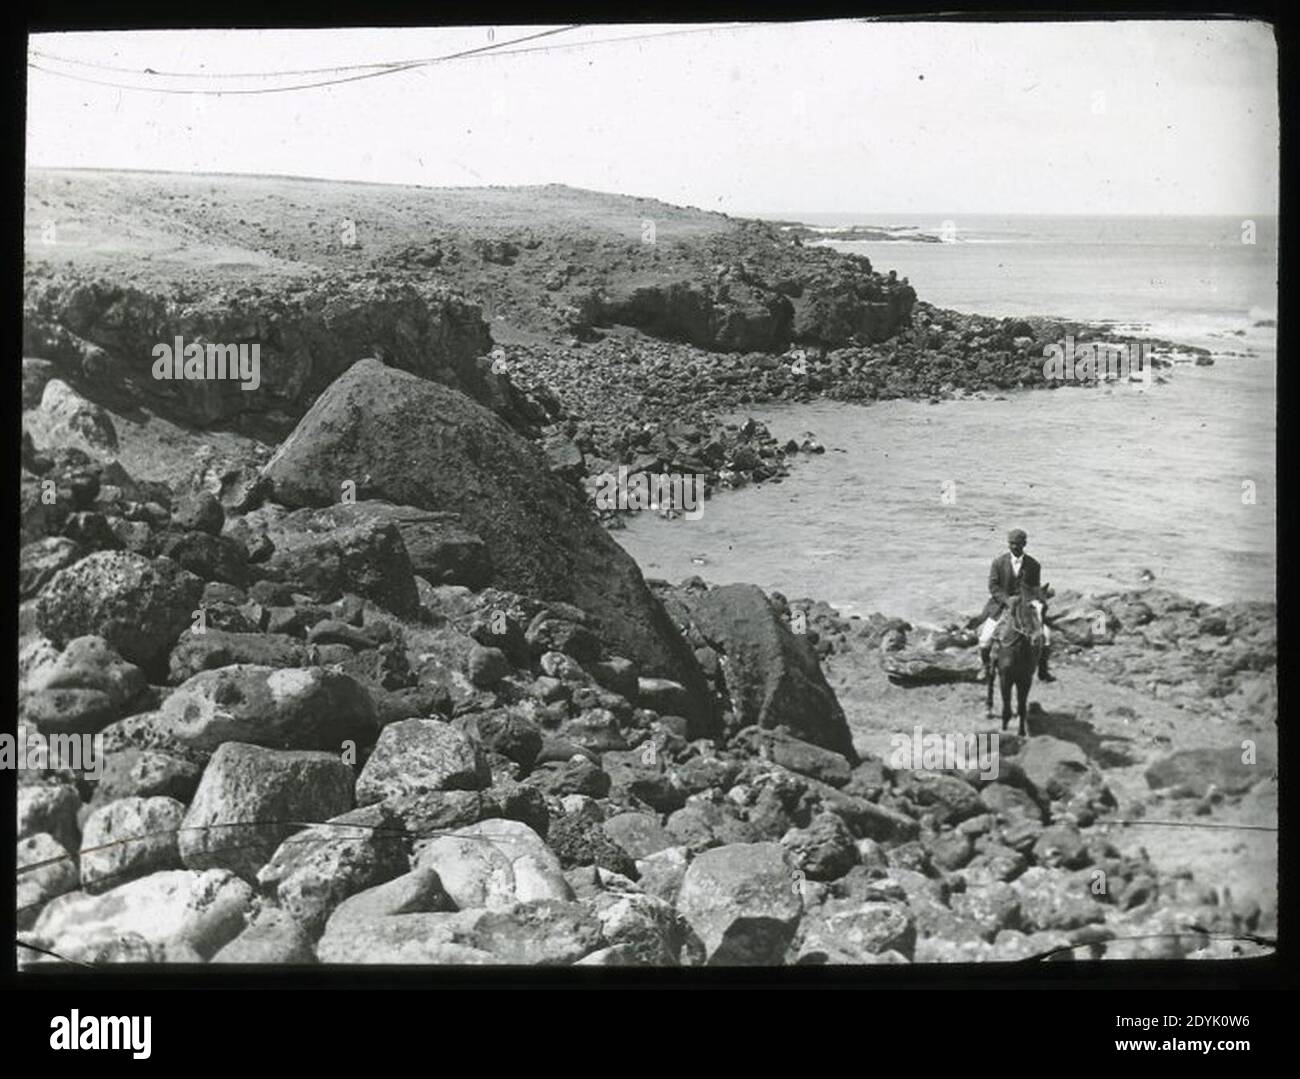 Landscape view beside the coast with a moai fallen on its back towards the sea and a man sitting on a horse for scale; Ahu Tetenga OcG.T.1498 Mana Expedition to Easter Island Stock Photo